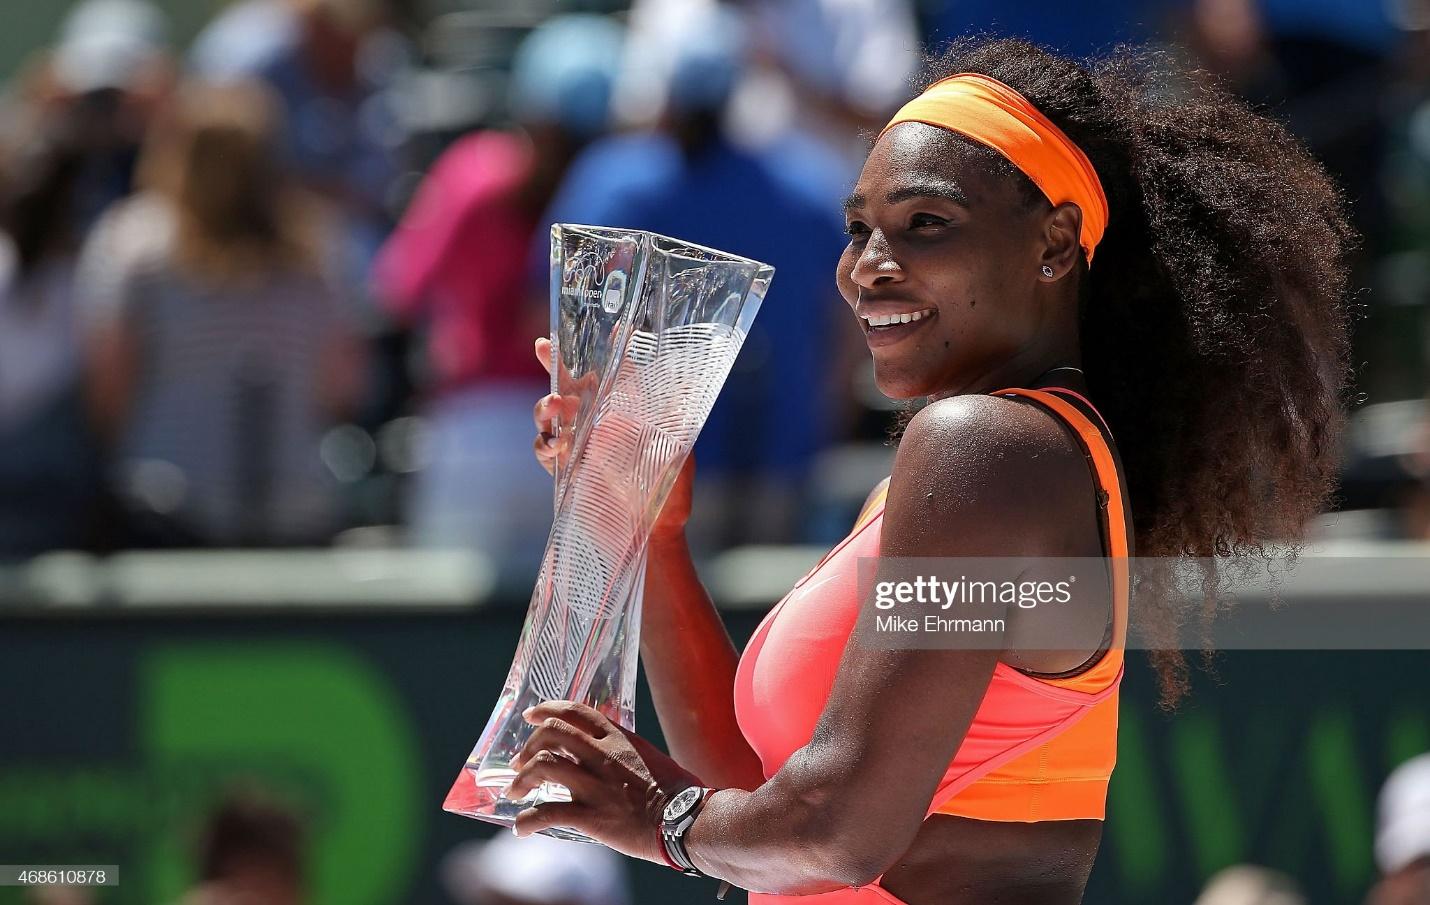 C:\Users\Valerio\Desktop\serena-williams-poses-with-the-trophy-after-winning-the-womens-final-picture-id468610878.jpg